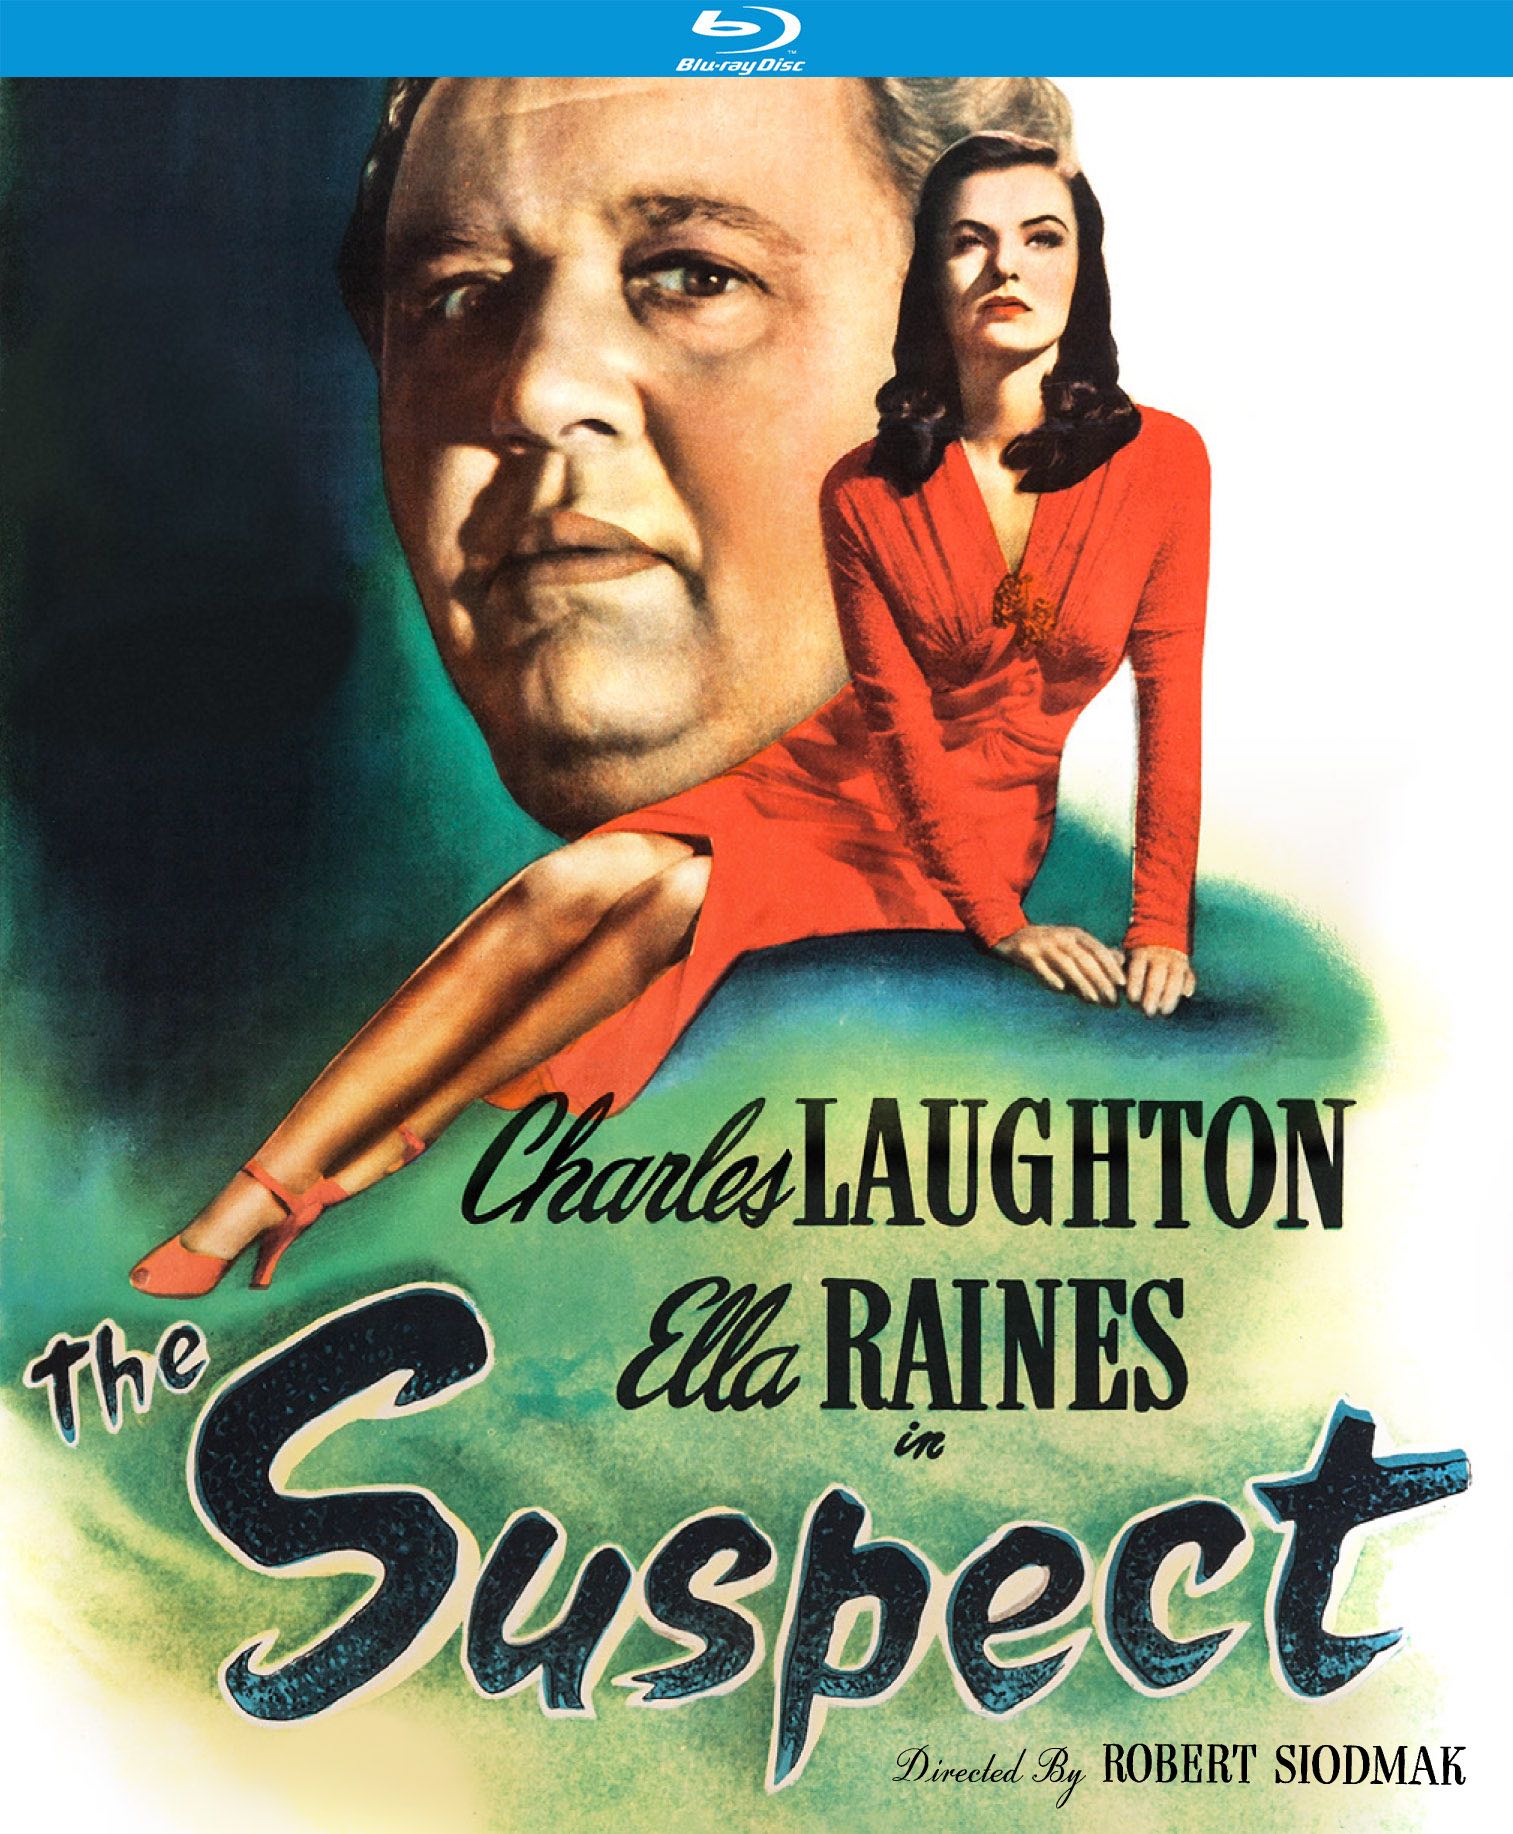 The Suspect [Blu-ray] [1944] - Best Buy